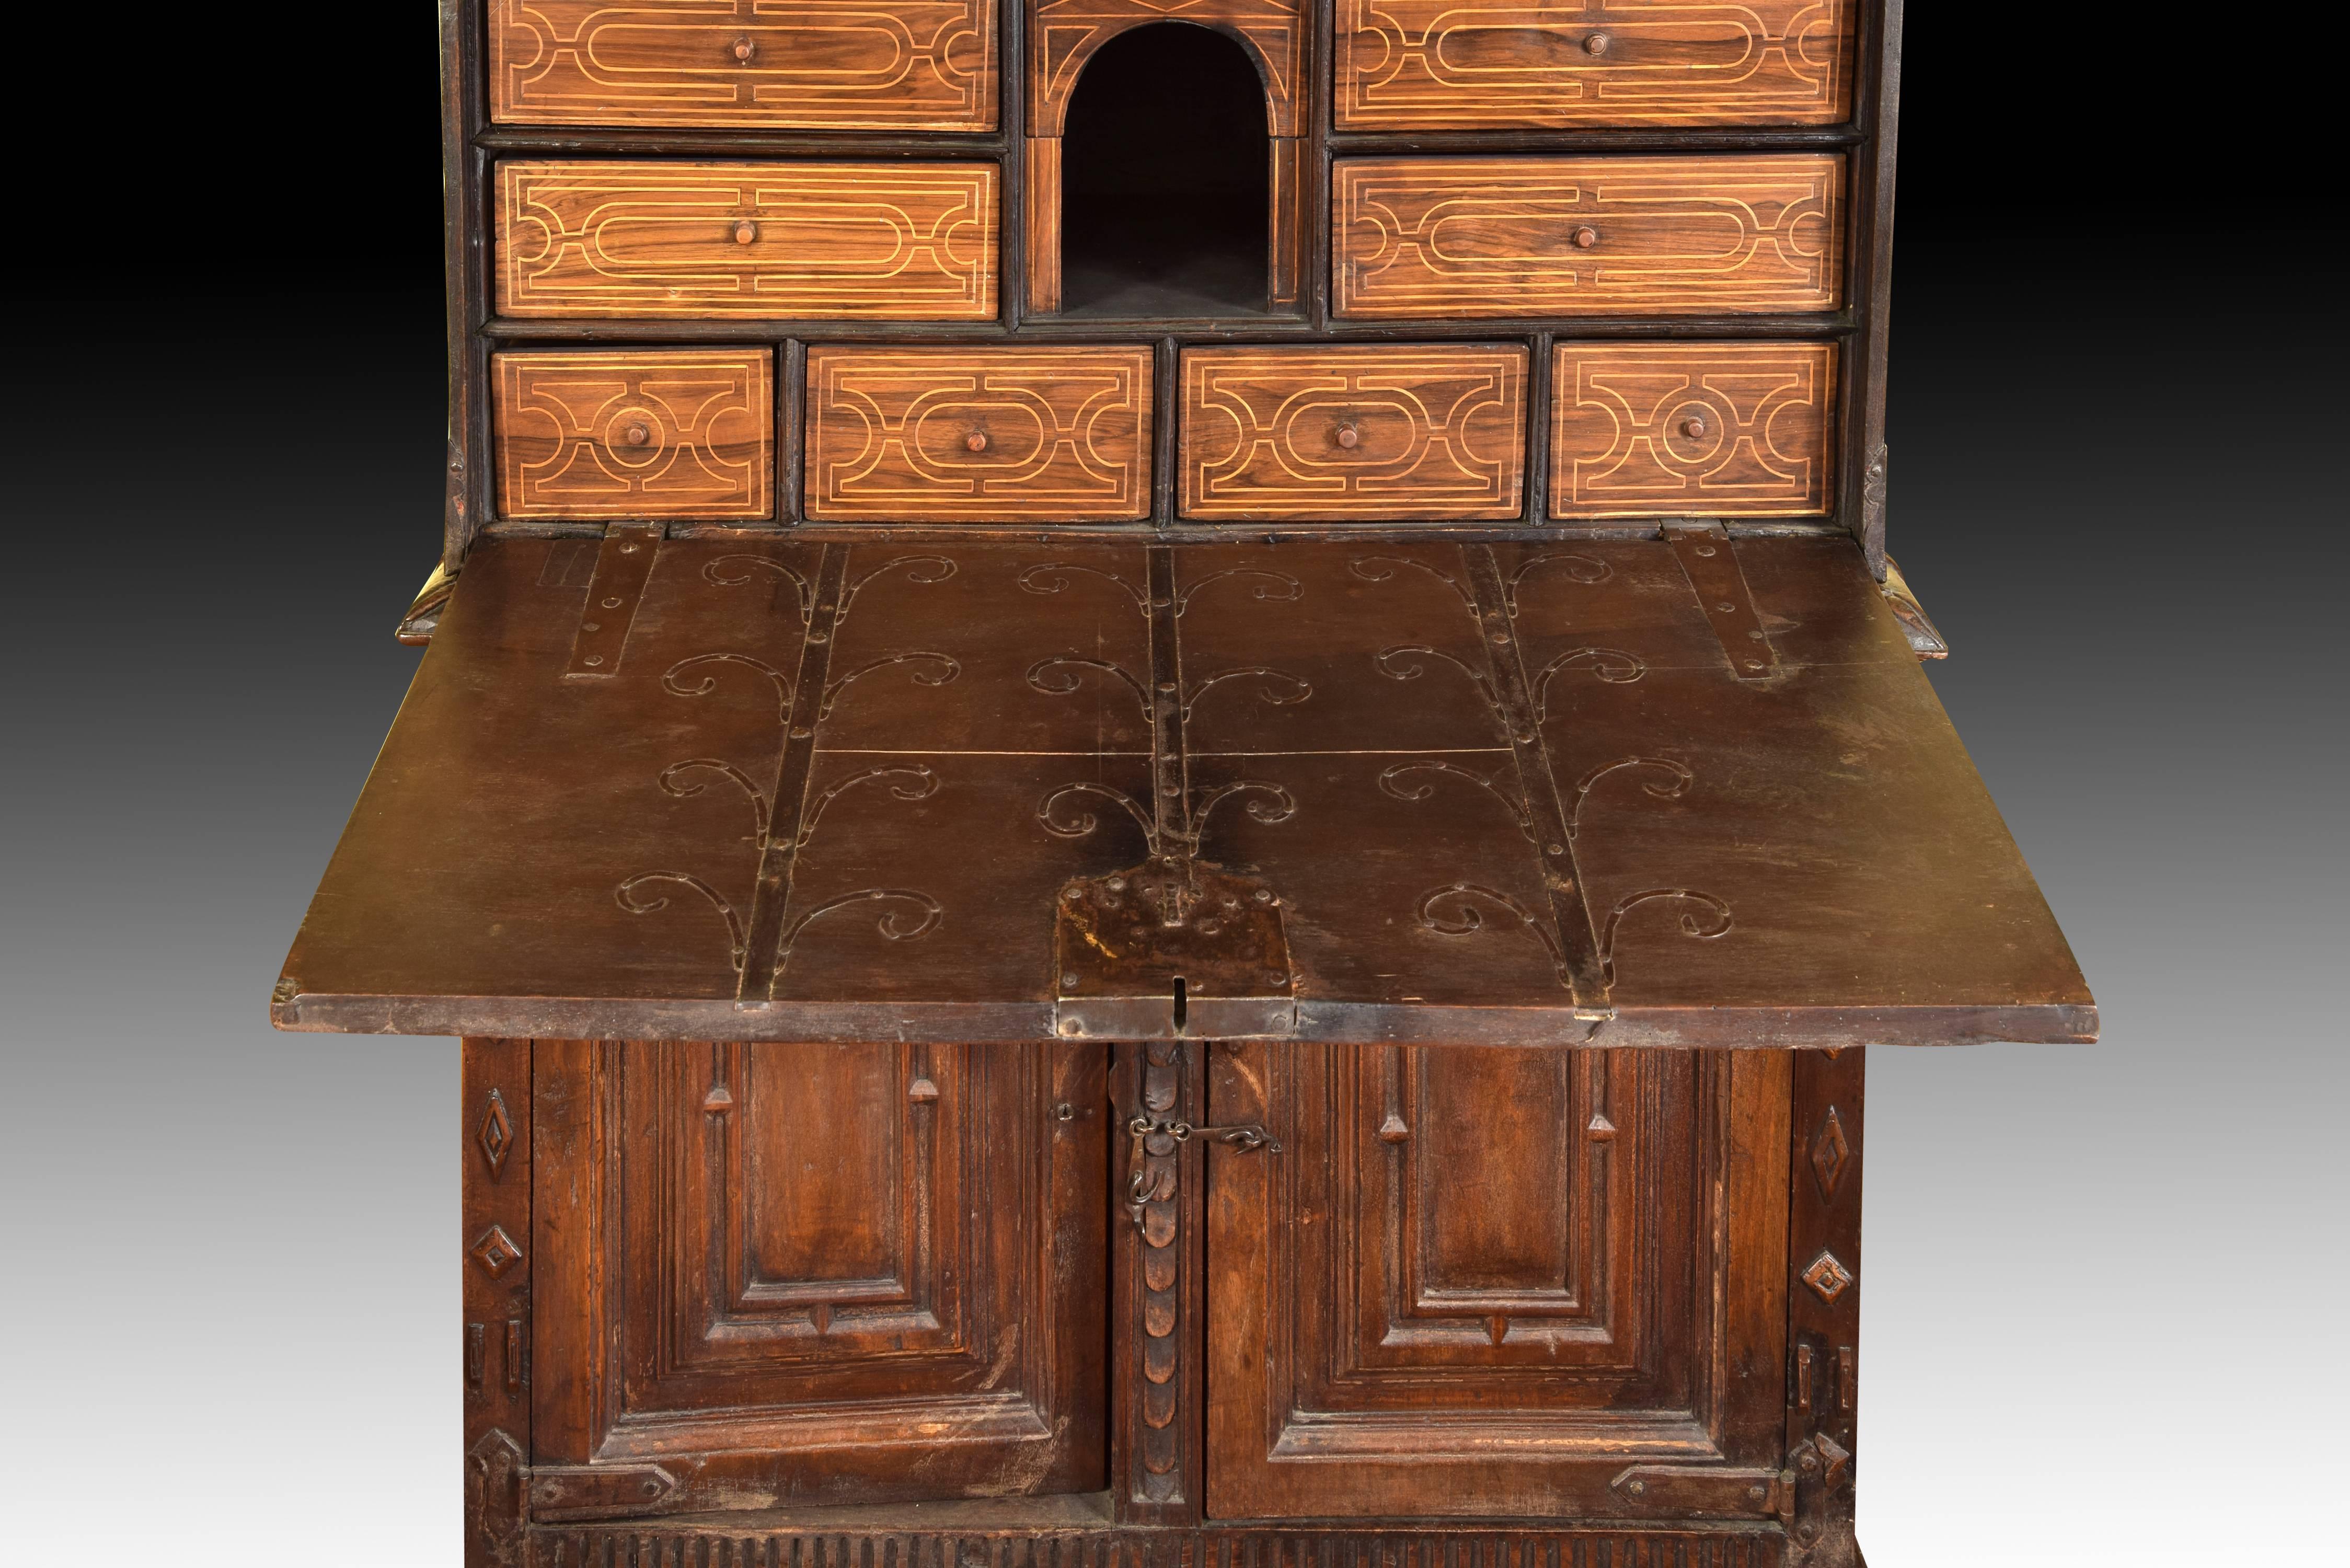 Hand-Carved Cupboard with Writing Desk, Wood, Wrought Iron, Asturias, Spain 17th Century